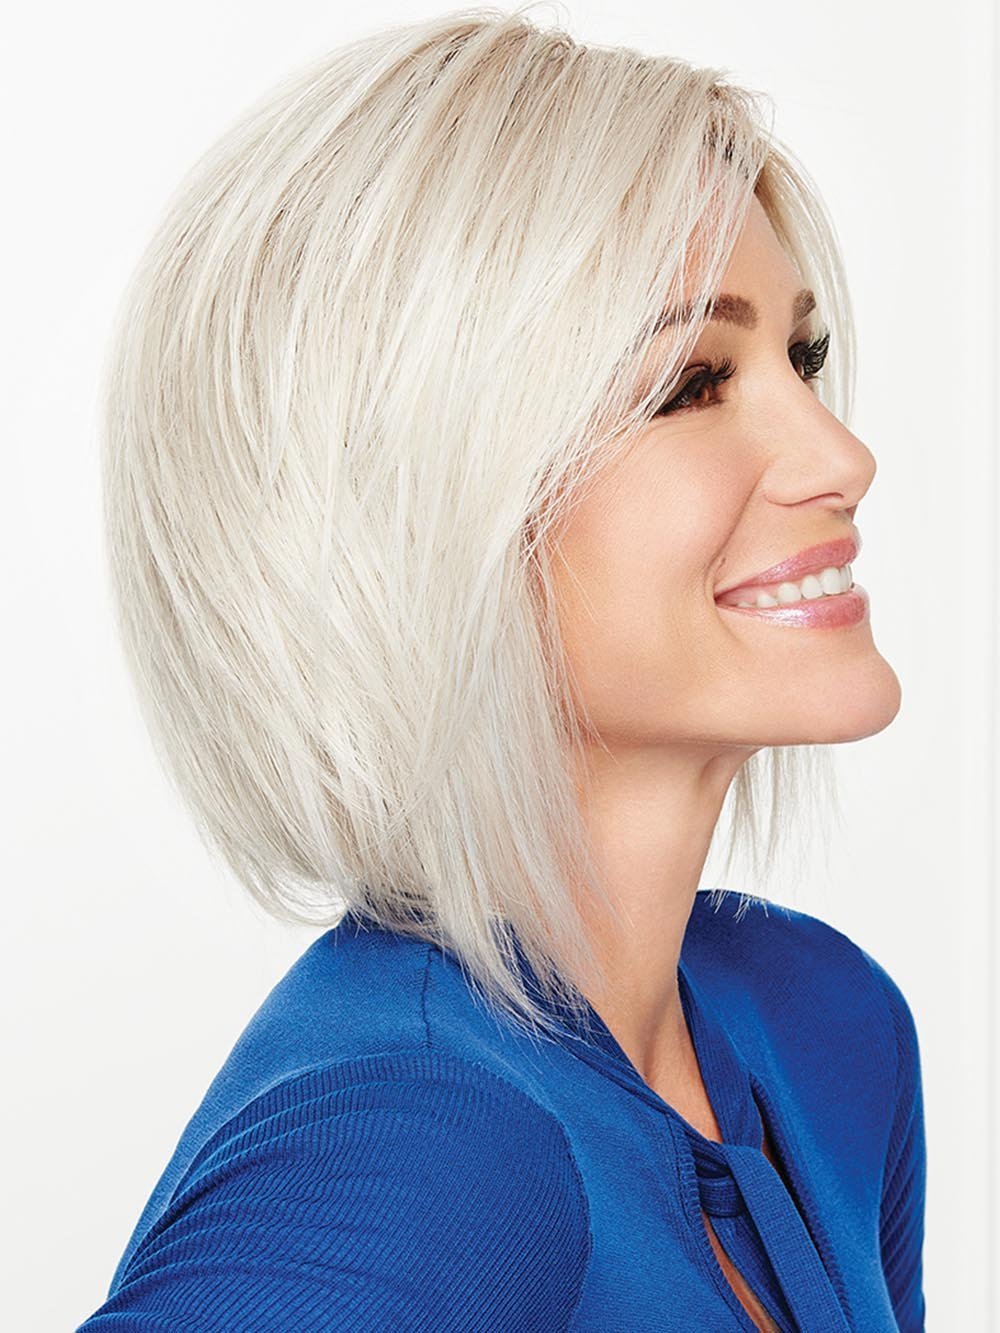 On Edge Wig by Gabor is this "shattered" below-the-chin bob has edgy, fashion-forward flair